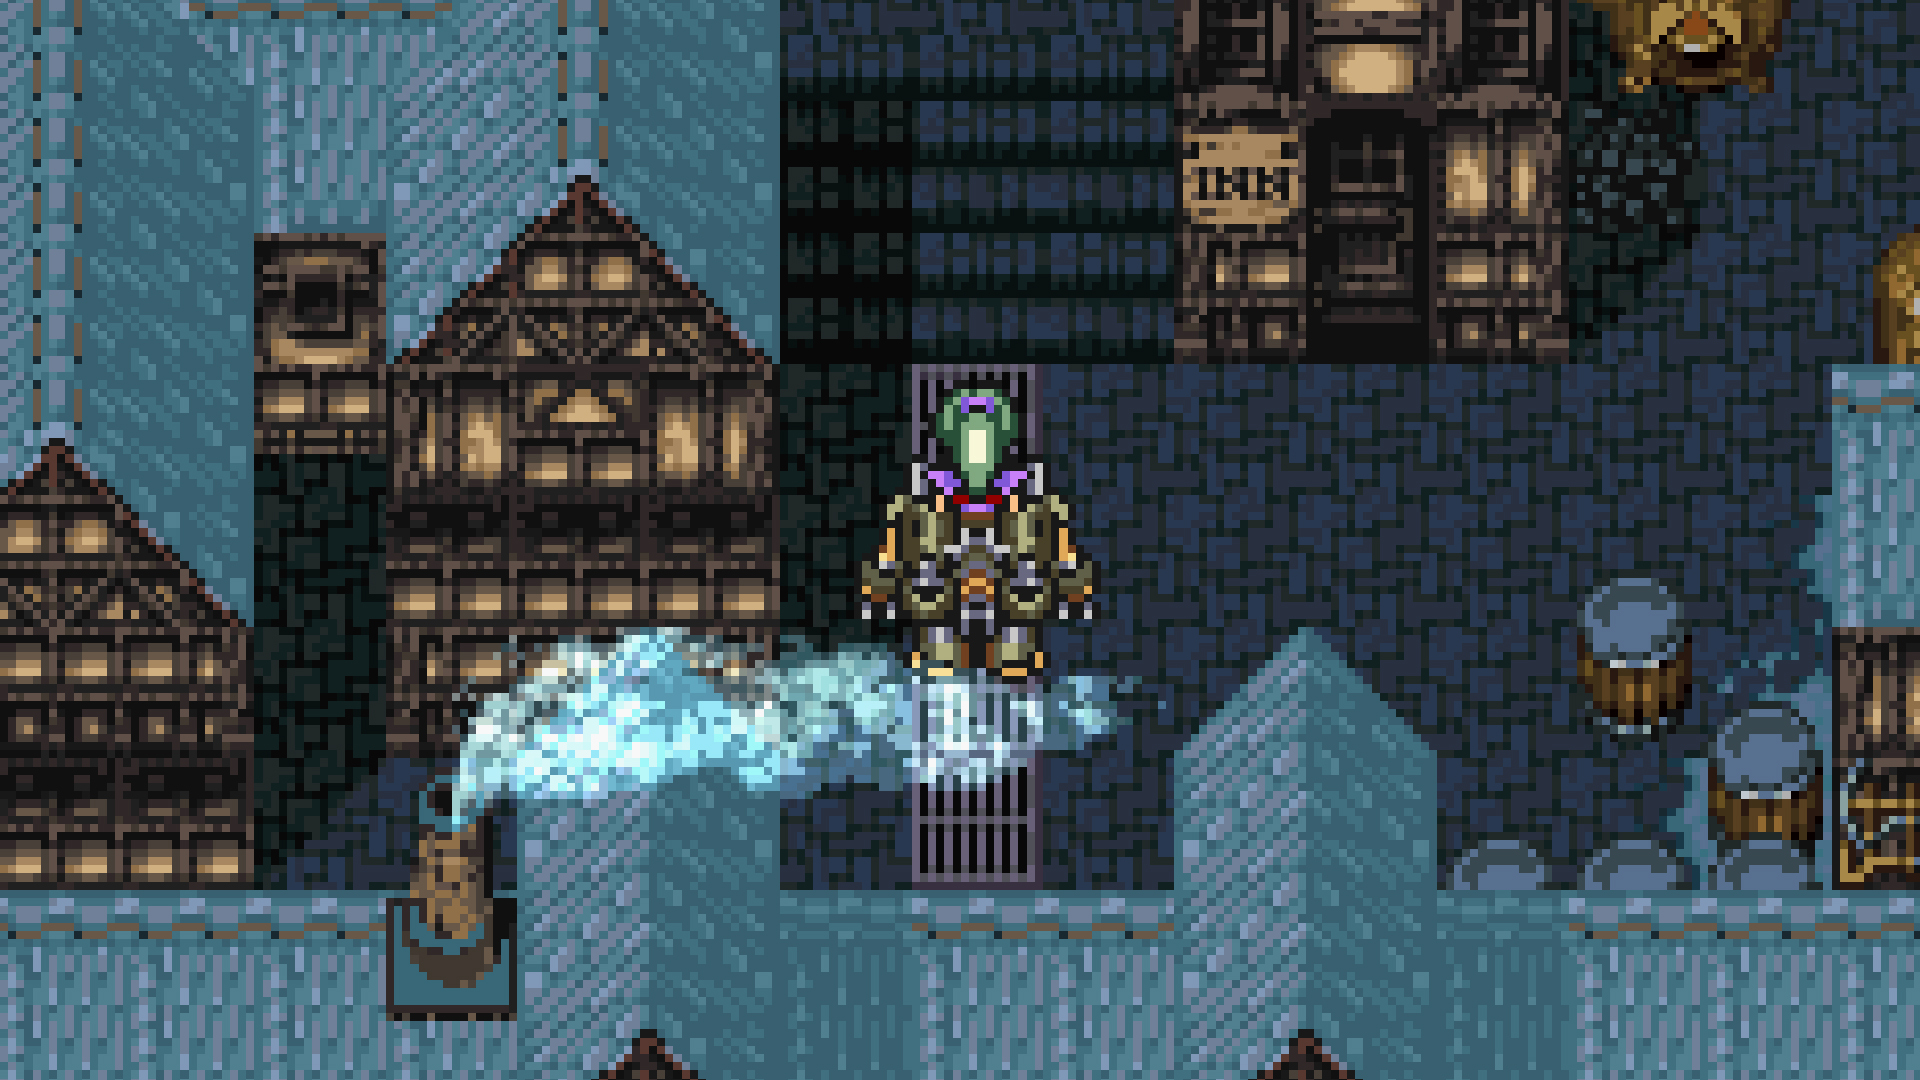  Get hype, the Final Fantasy 6 Pixel Remaster releases later this month 